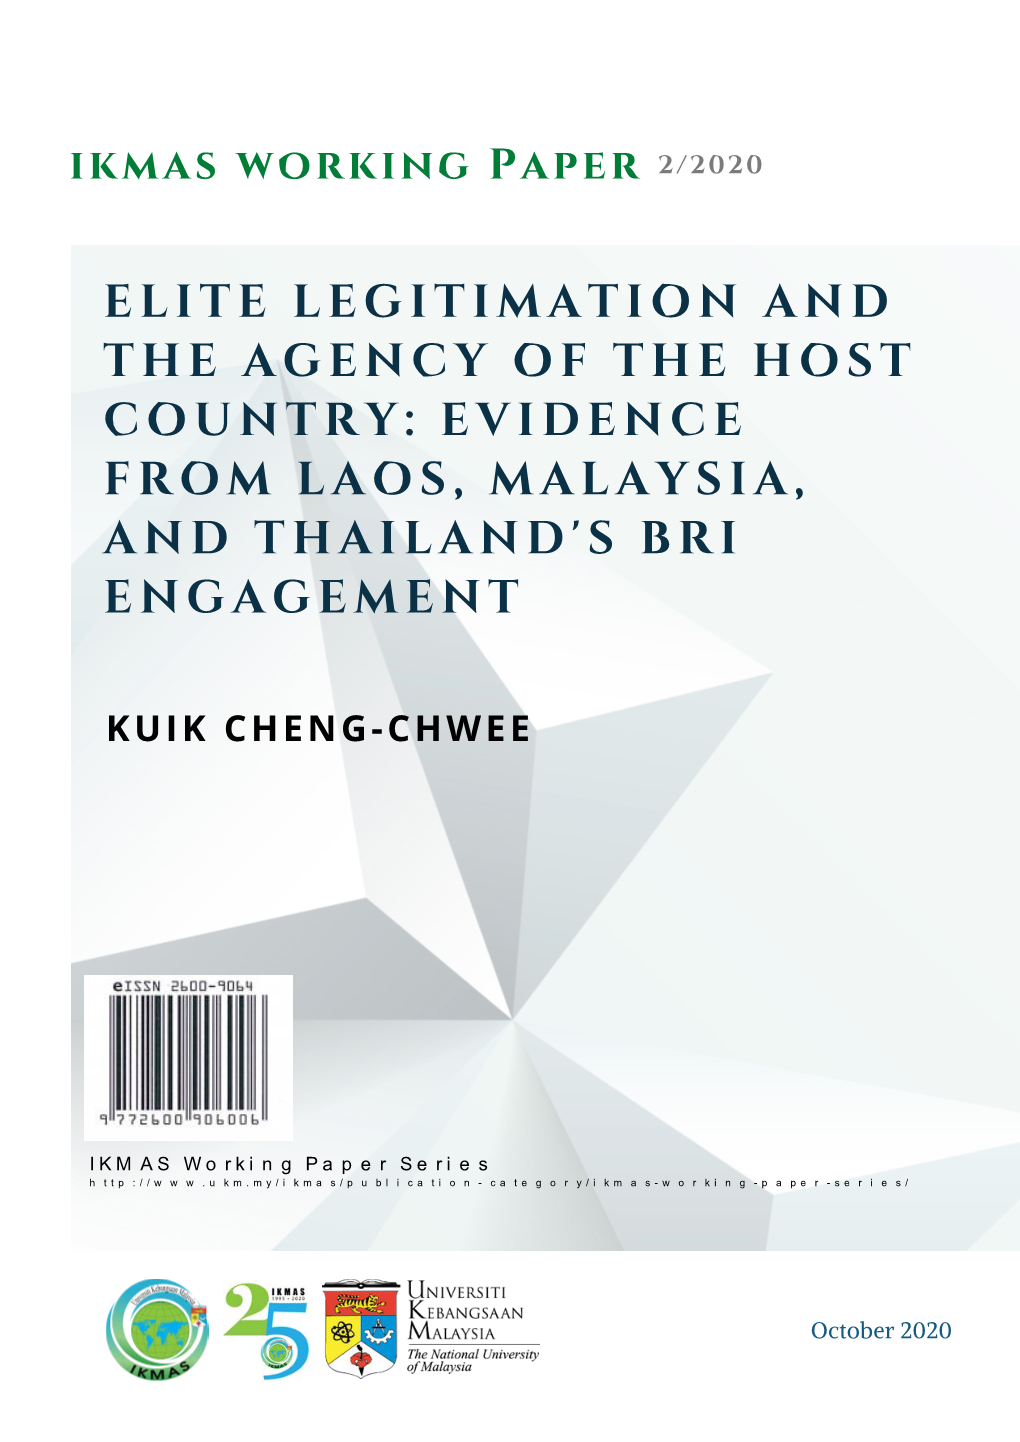 Elite Legitimation and the Agency of the Host Country: Evidence from Laos, Malaysia, and Thailand's Bri Engagement